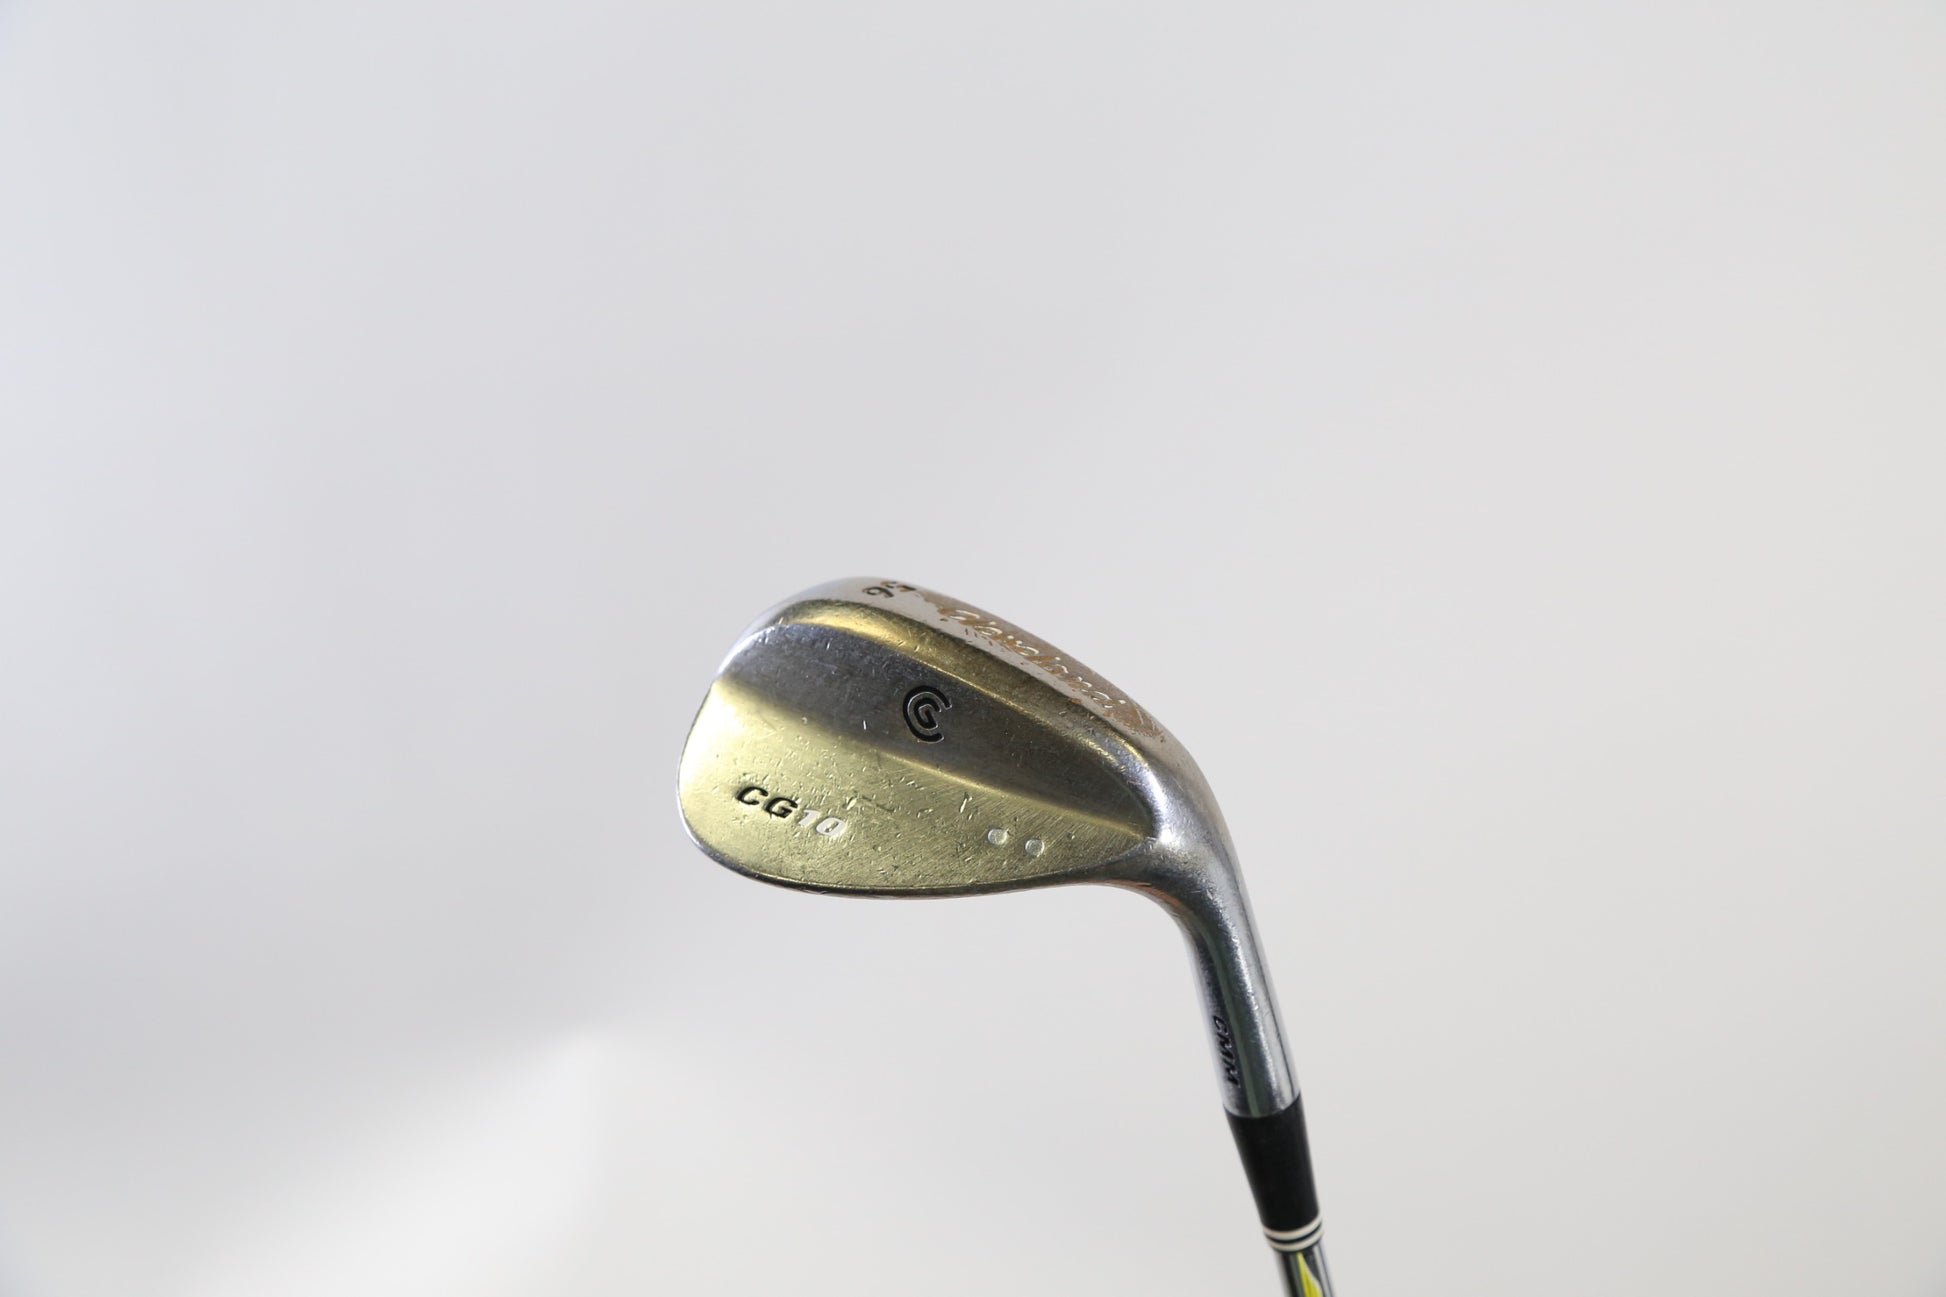 Used Cleveland CG10 Sand Wedge - Right-Handed - 56 Degrees - Stiff Flex-Next Round